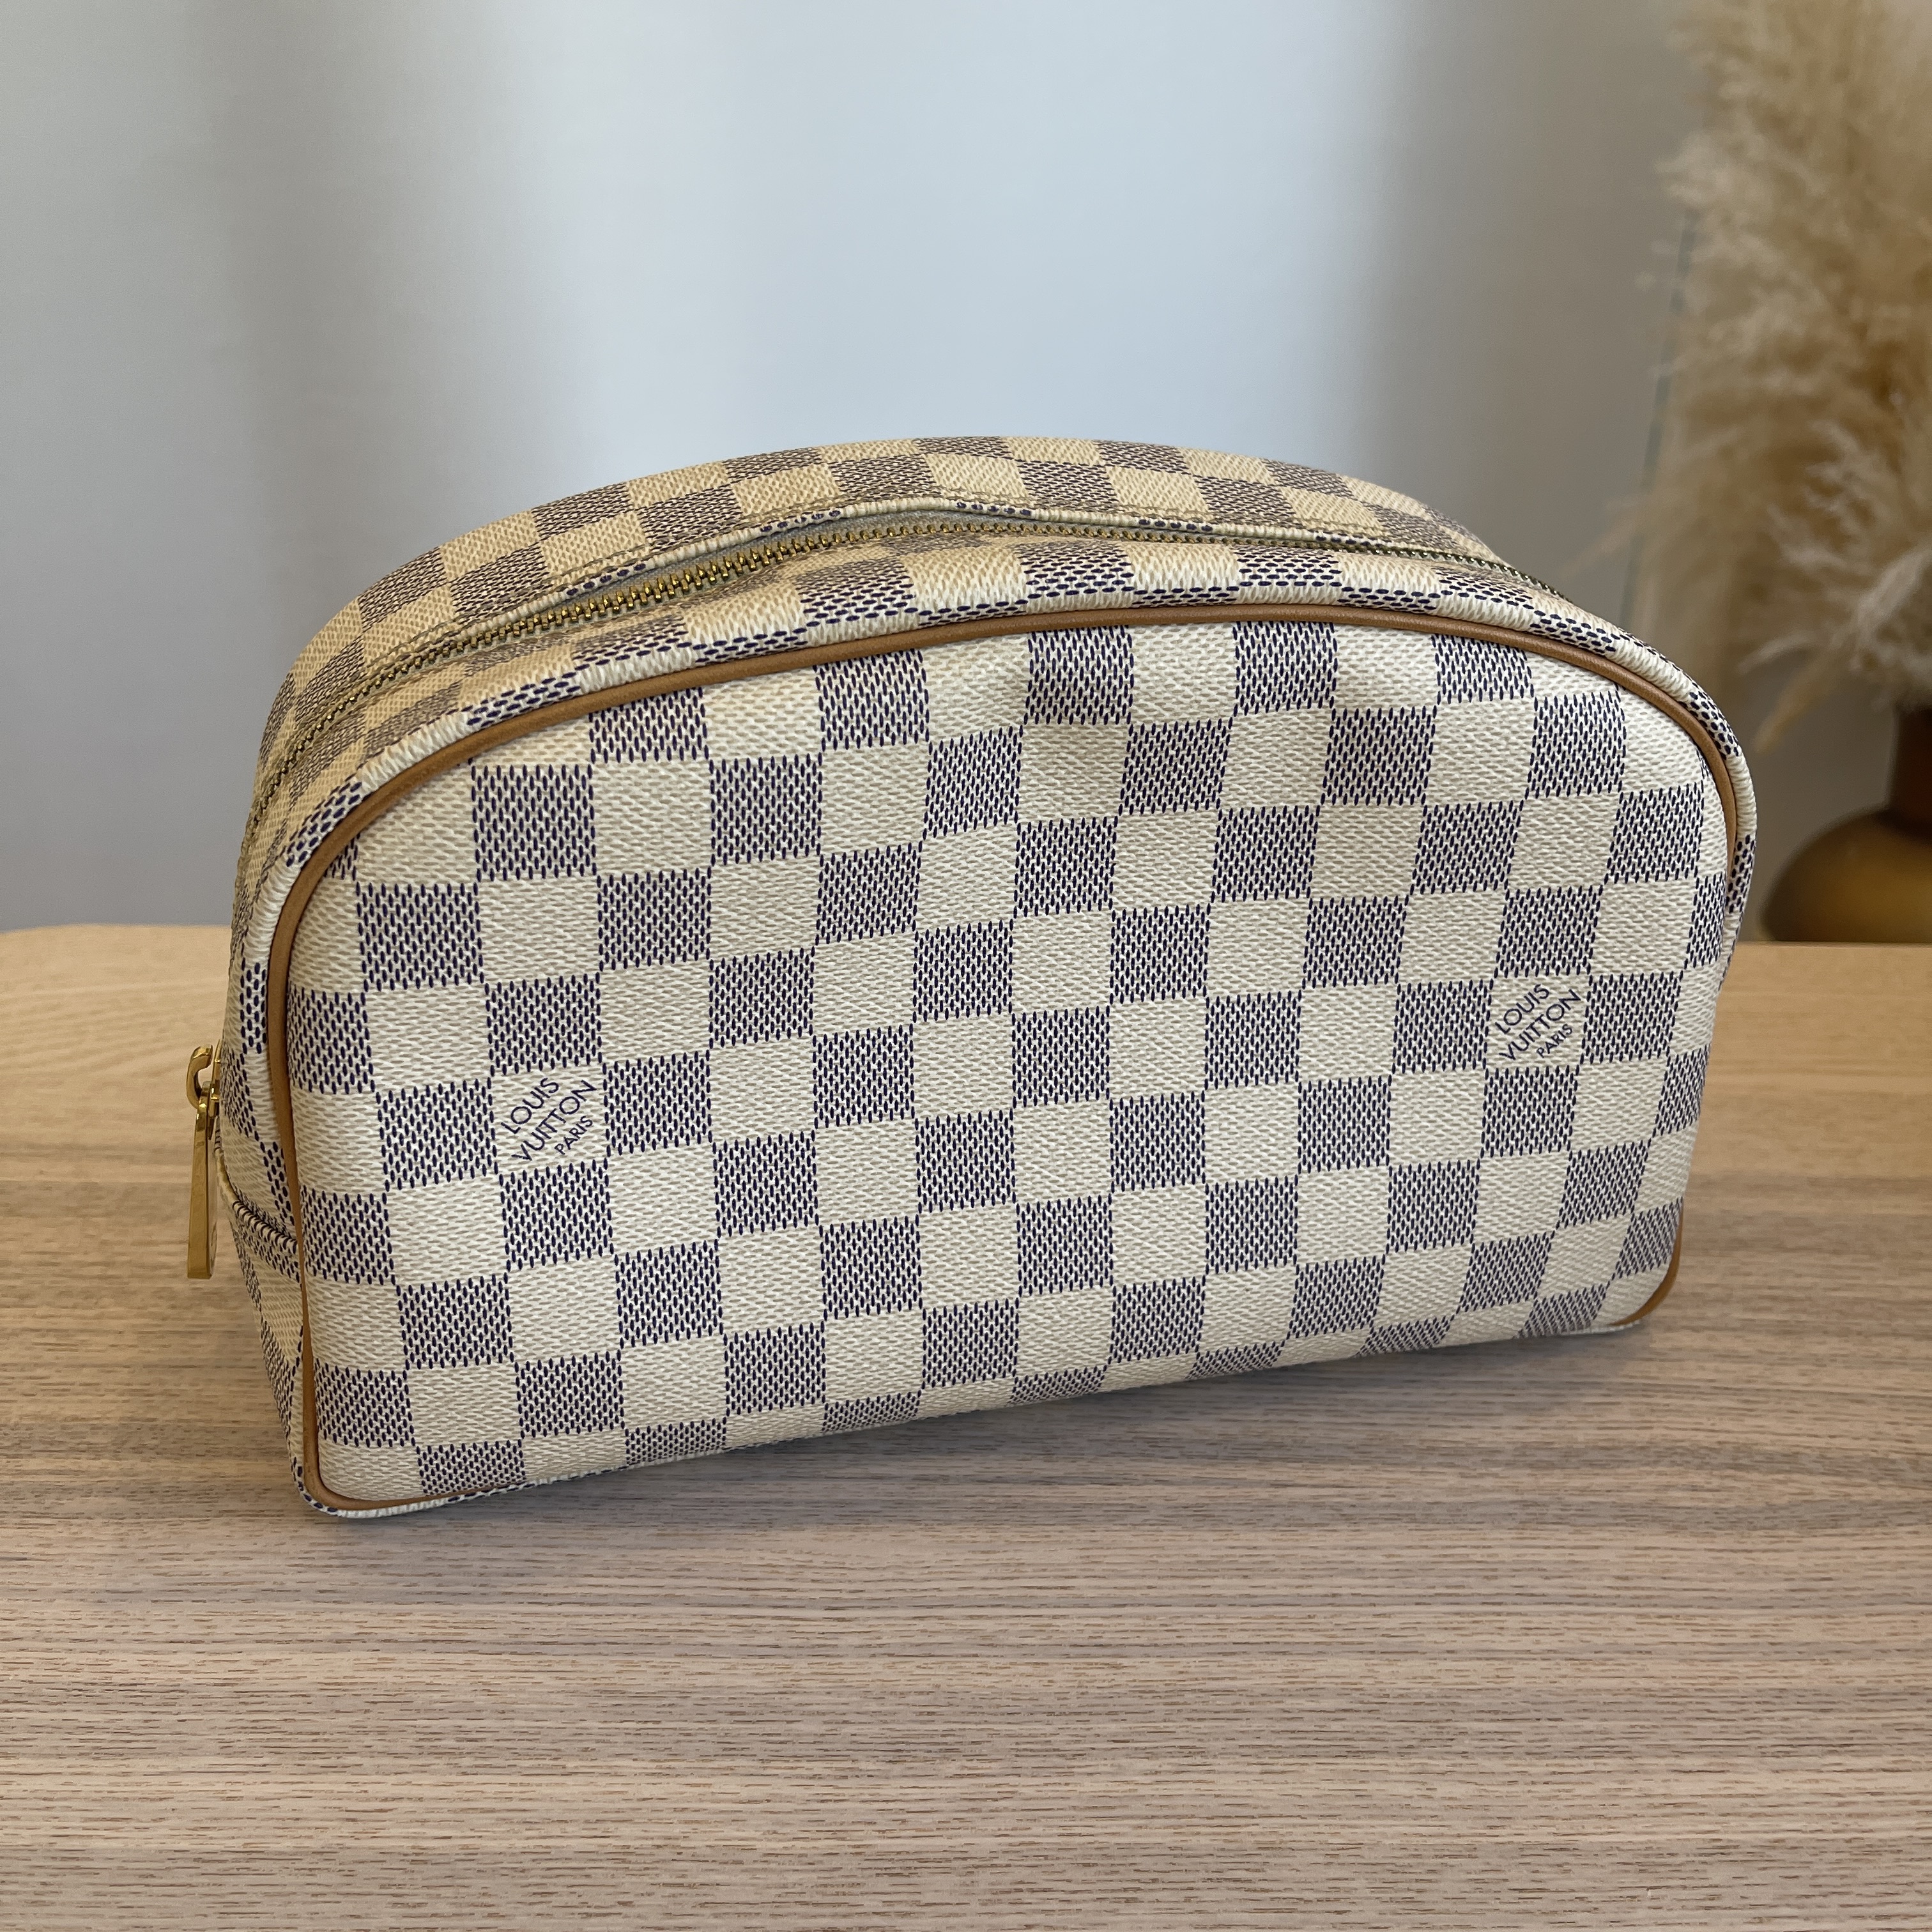 Products By Louis Vuitton: Toiletry Bag 25